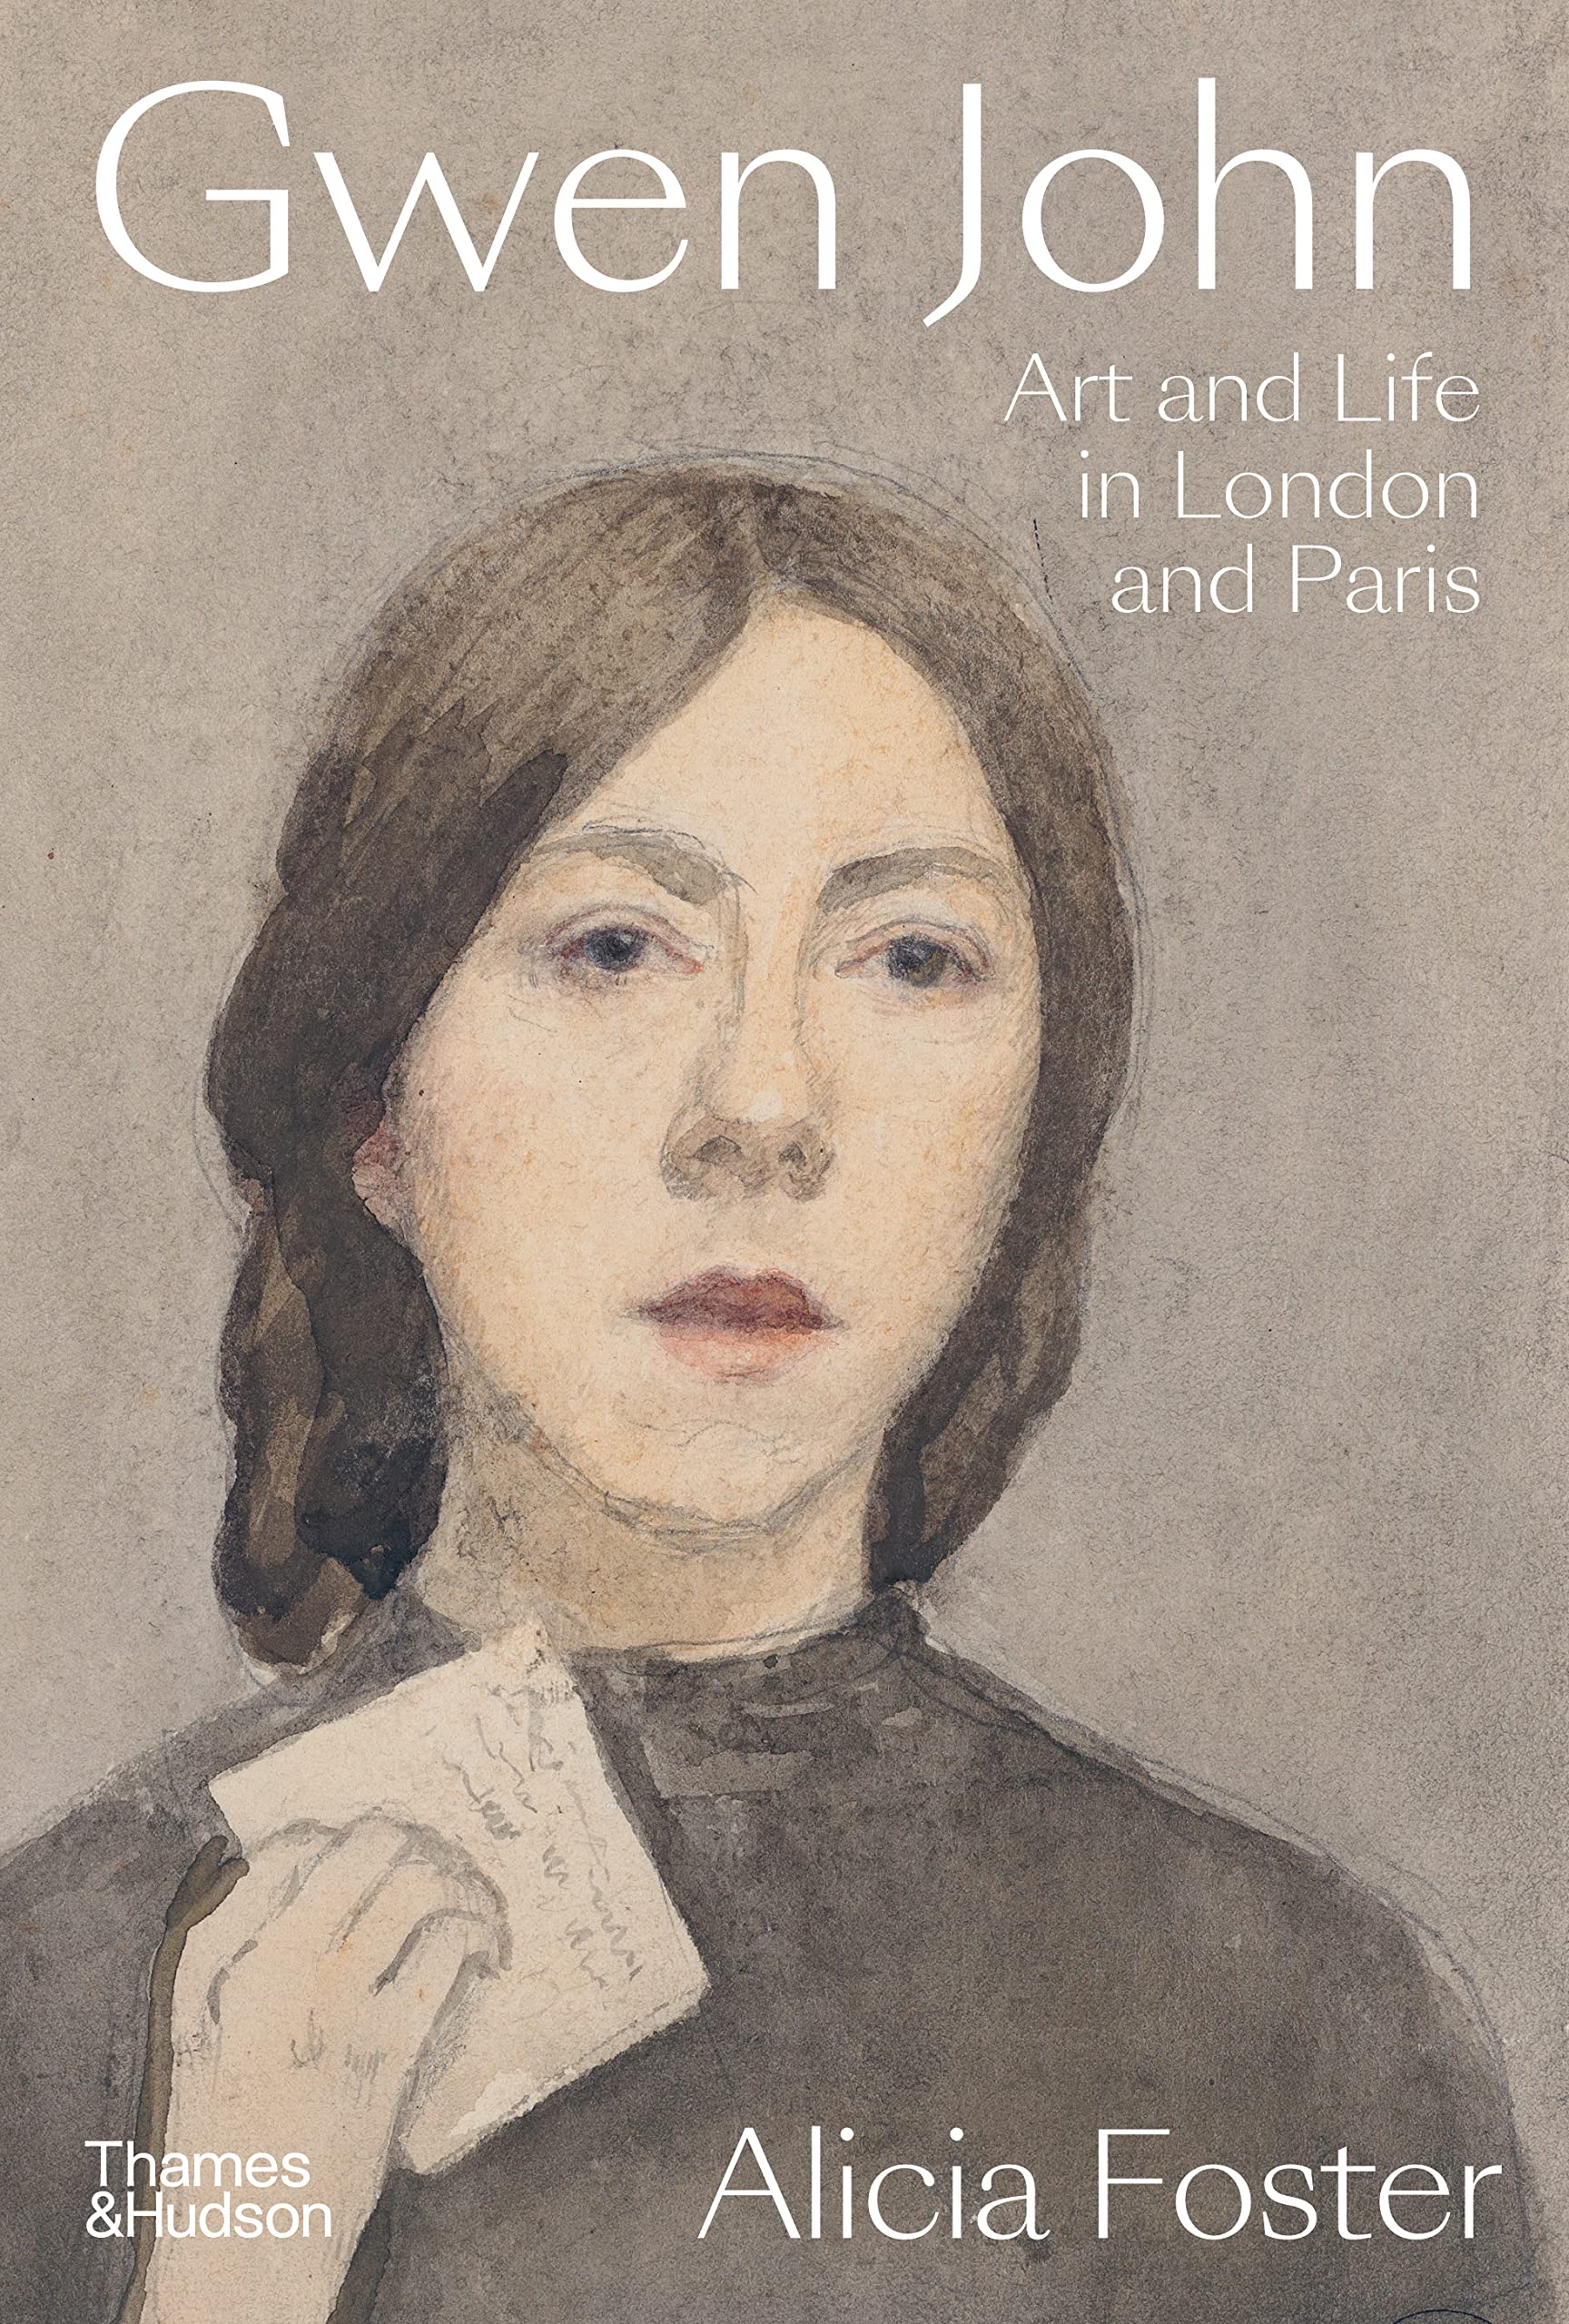 Gwen John - Art and Life in London and Paris | Alicia Foster